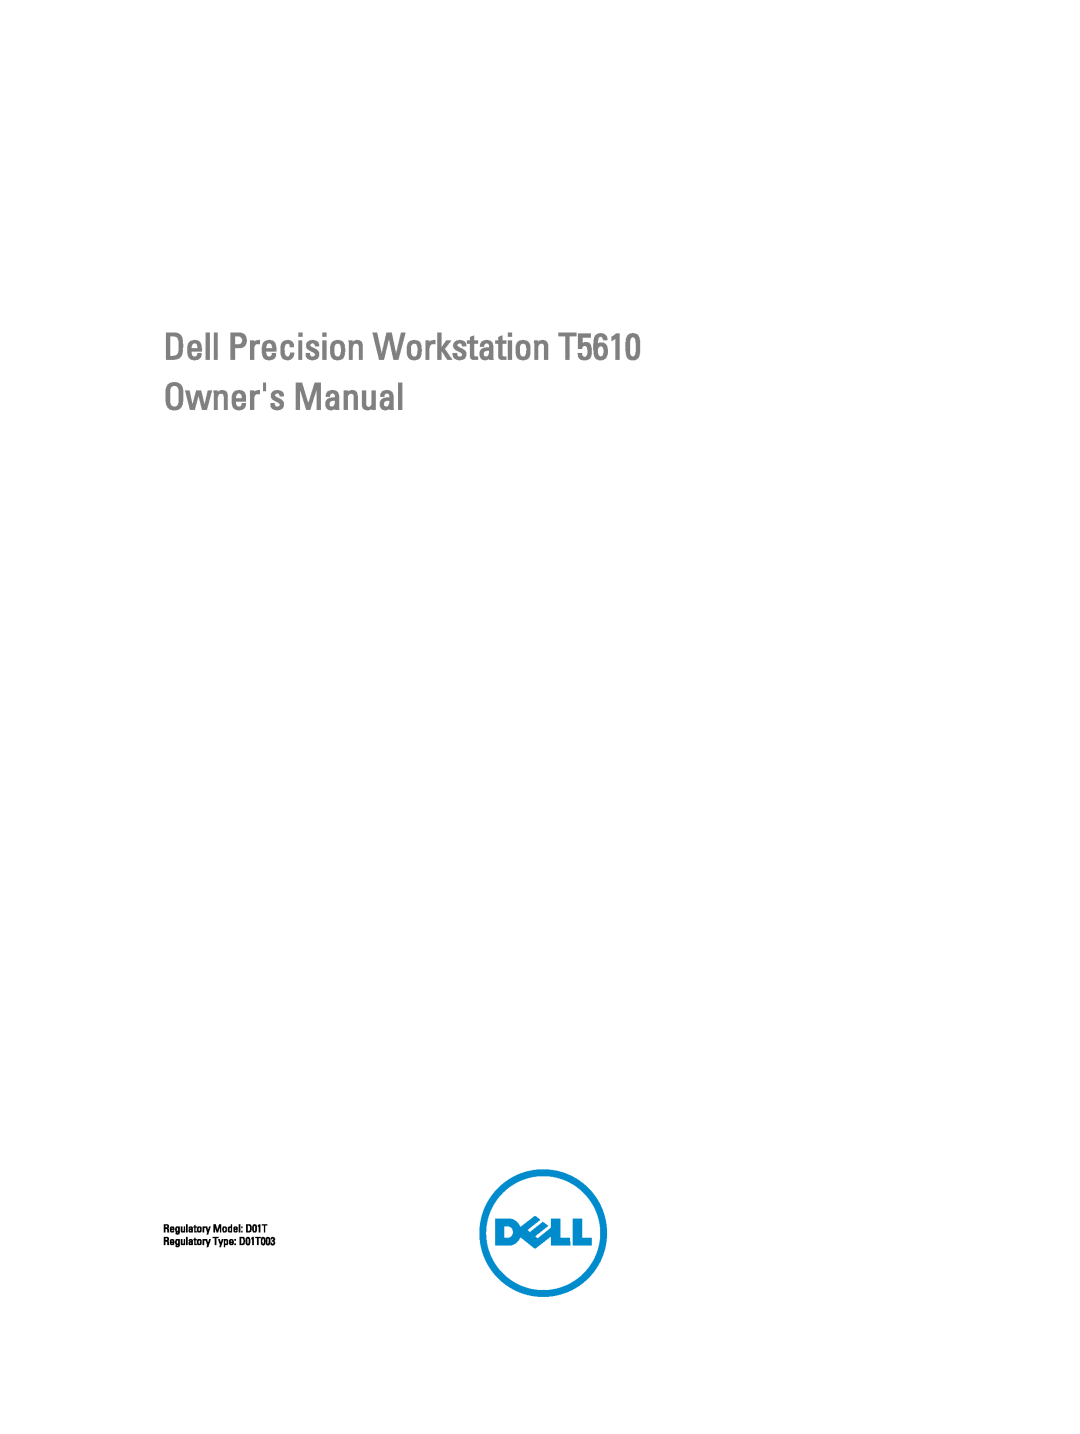 Dell owner manual Dell Precision Workstation T5610 Owners Manual, Regulatory Model D01T Regulatory Type D01T003 